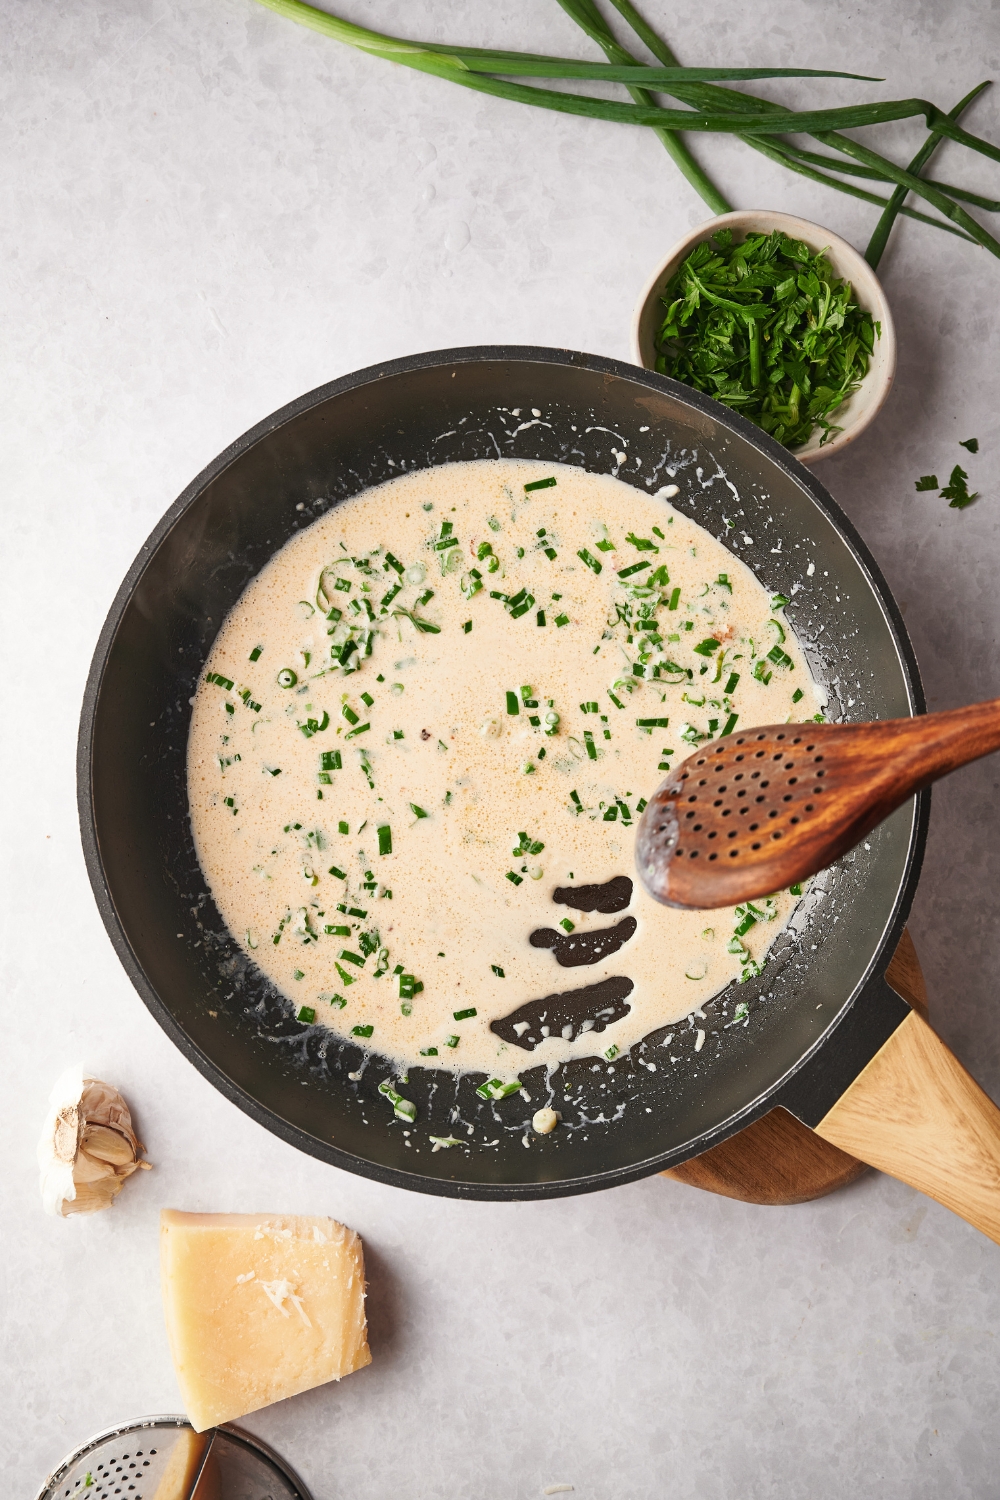 A skillet with herbs cooking in a cream sauce.